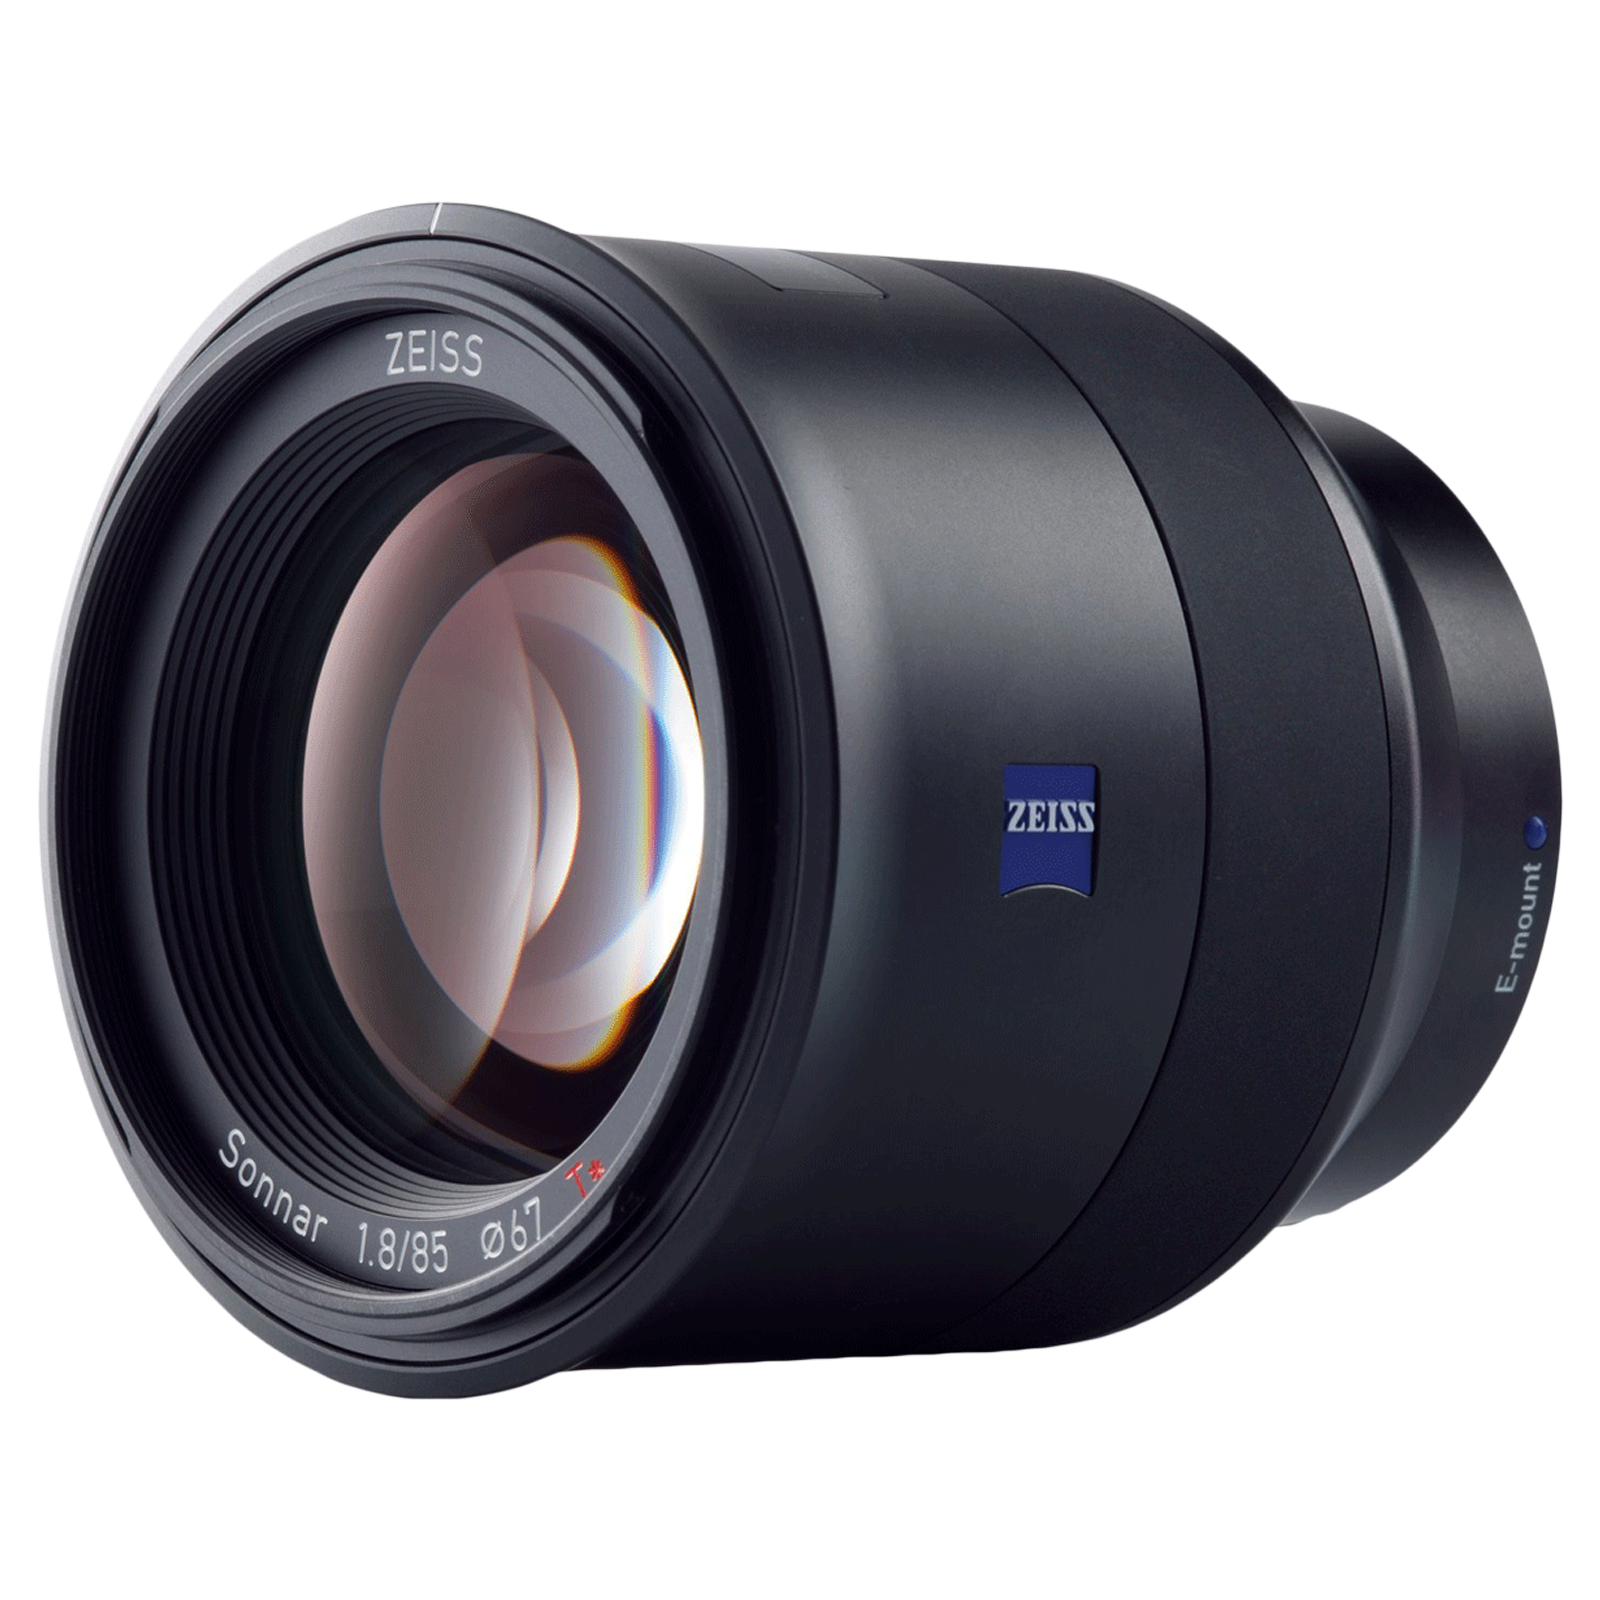 Carl Zeiss Batis ‎85mm f/1.8 - f/22 Telephoto Lens (ZEISS T Star Anti-reflective Coating, 000000-2103-751, Black)